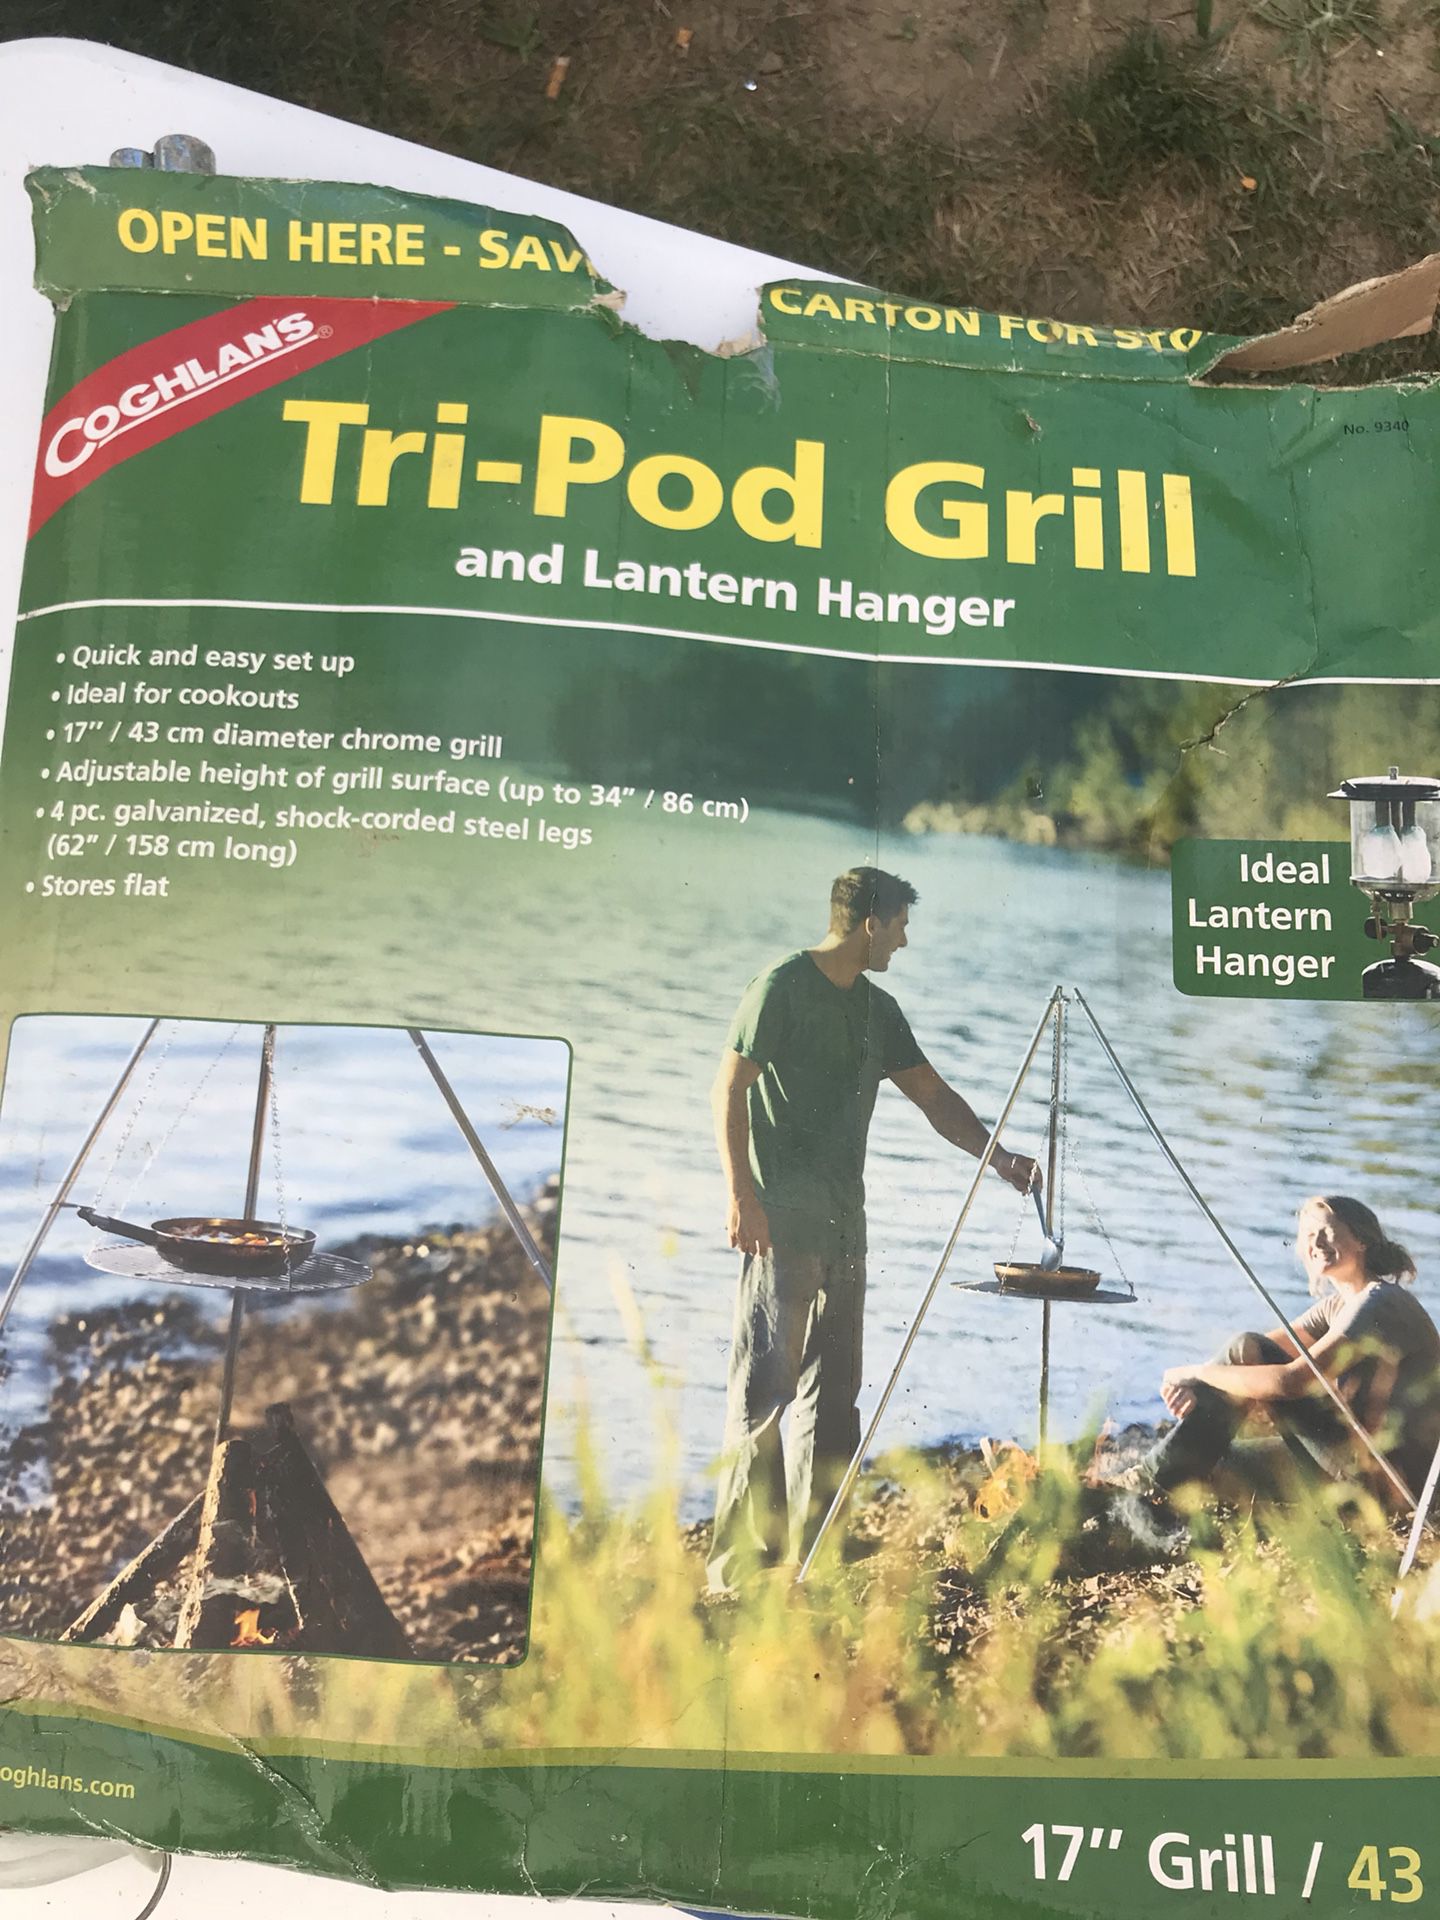 Tri pod for grilling great for camping / fishing / hunting